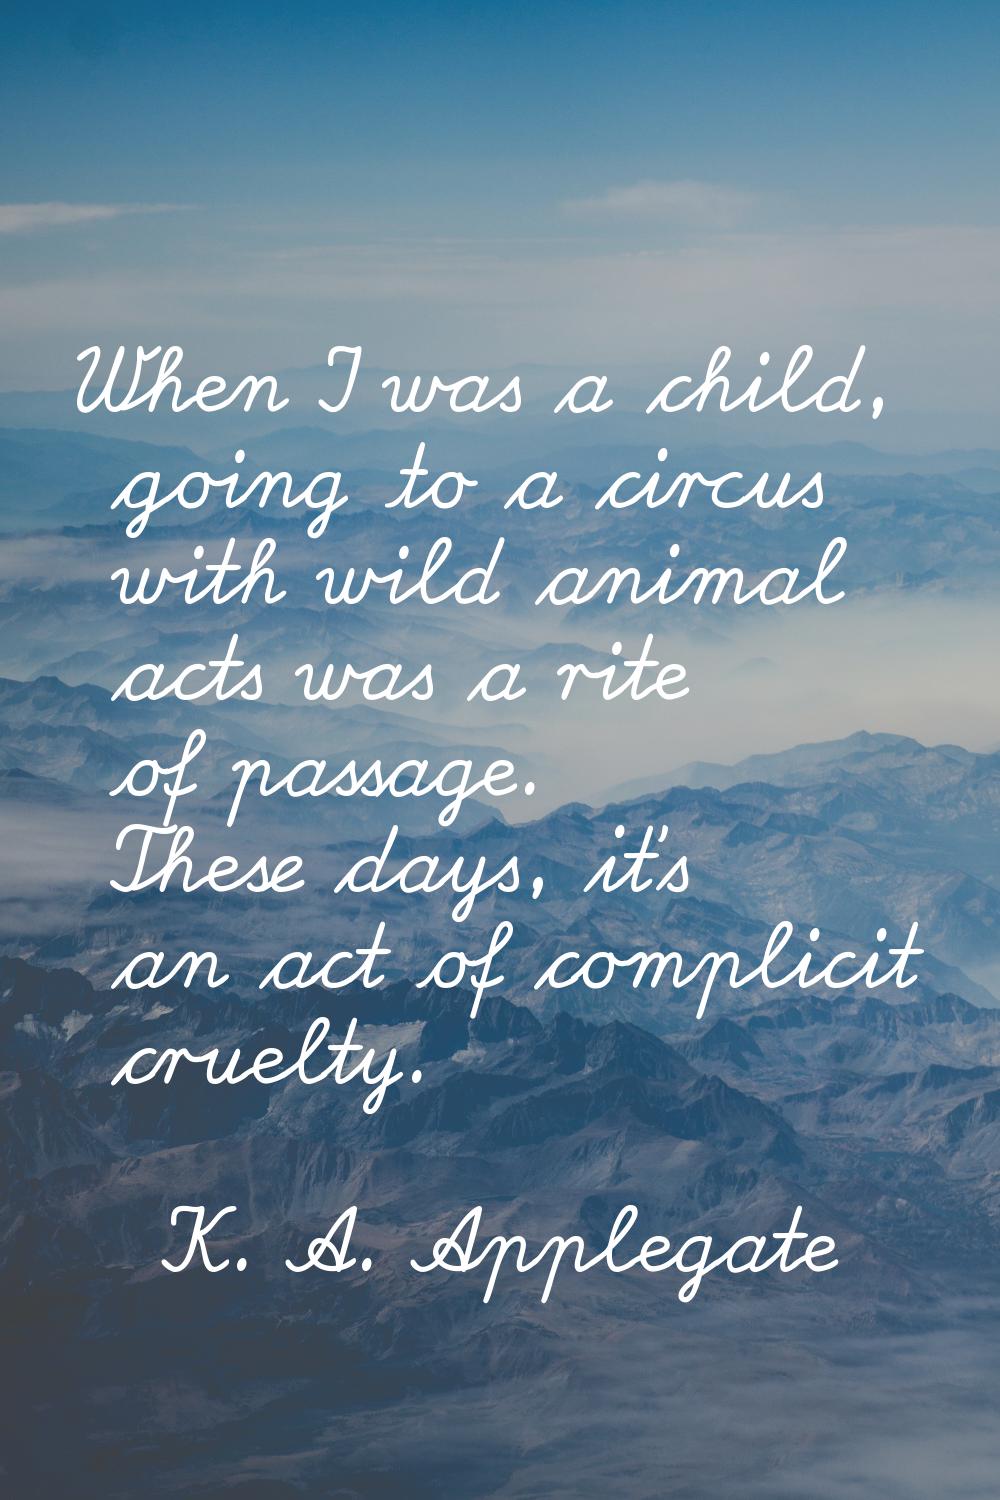 When I was a child, going to a circus with wild animal acts was a rite of passage. These days, it's